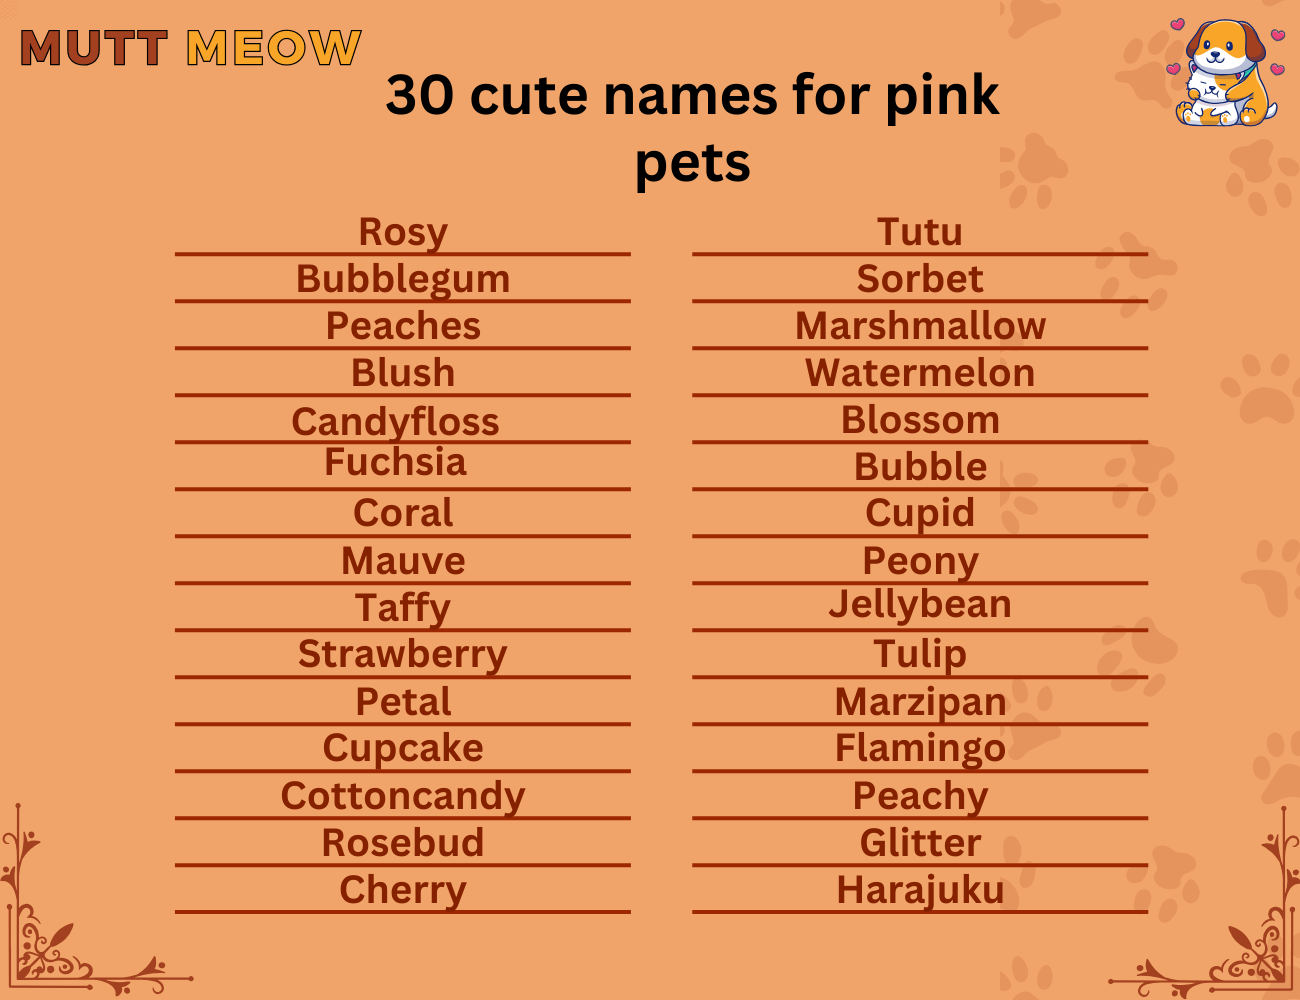 30 cute names for pink pets